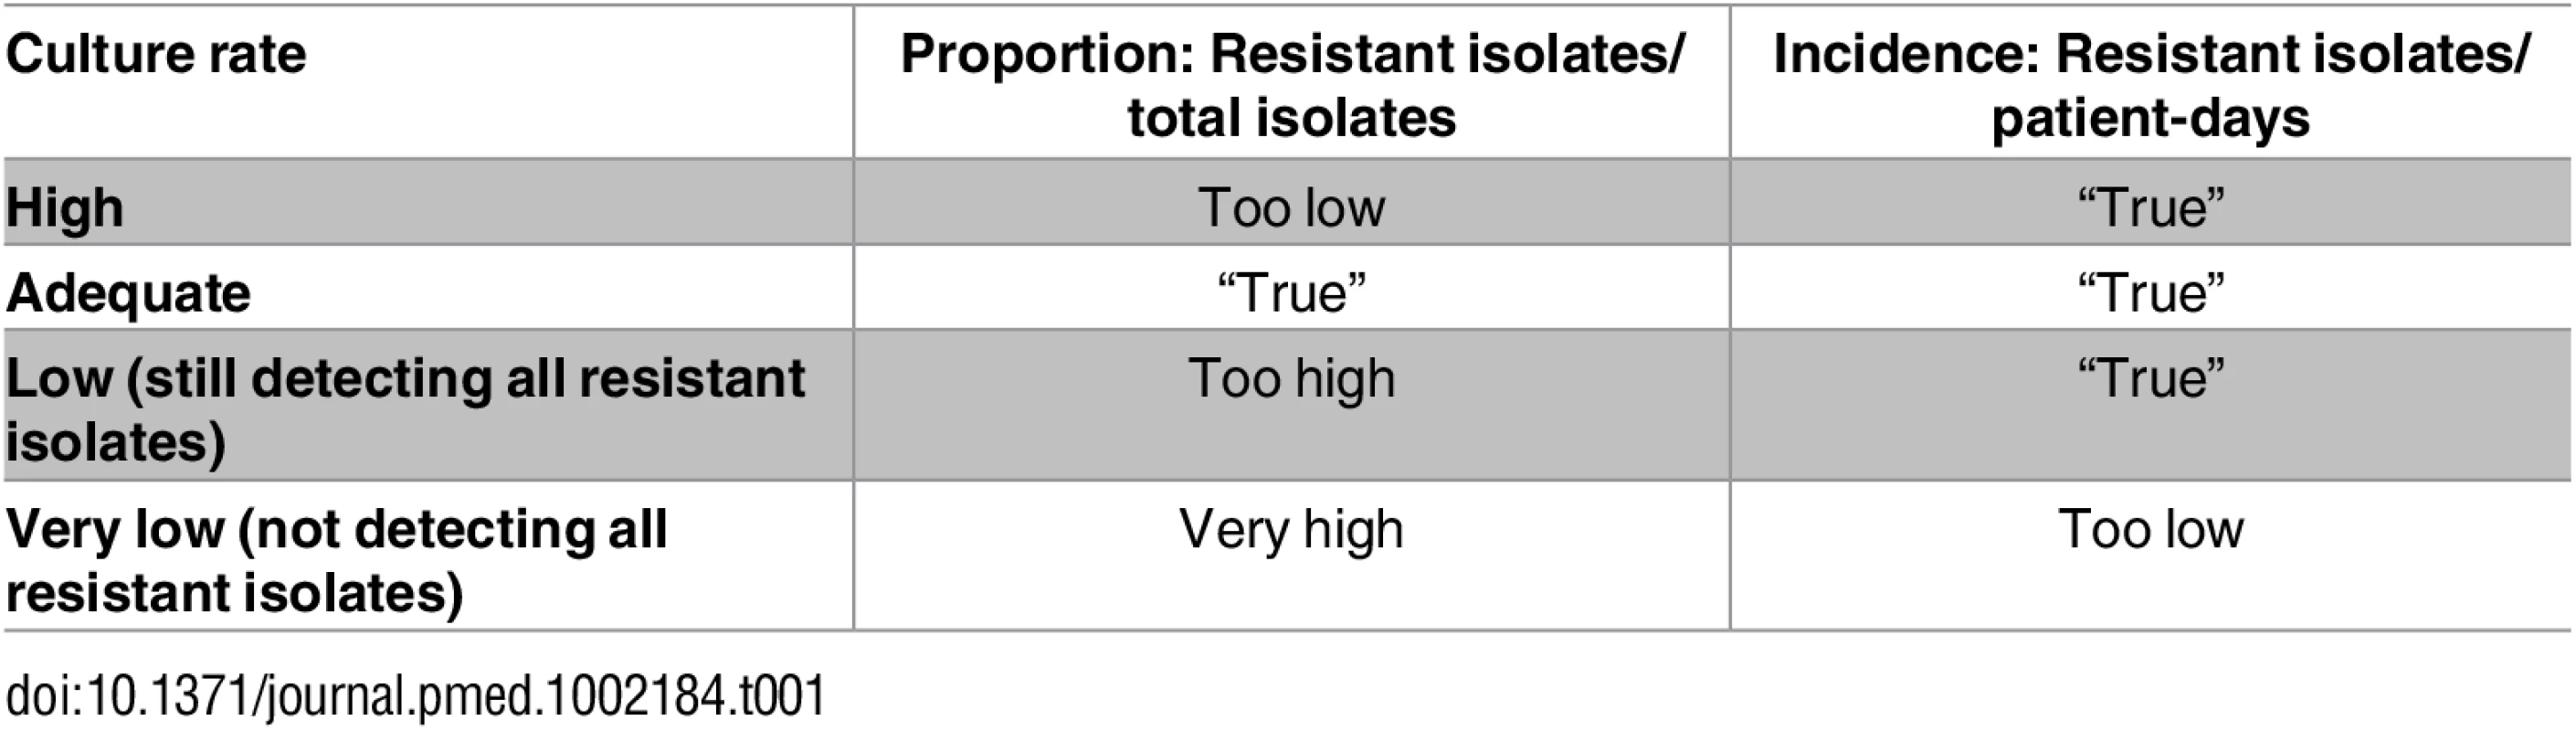 Influence of culture rate on resistance proportions and resistance rates.